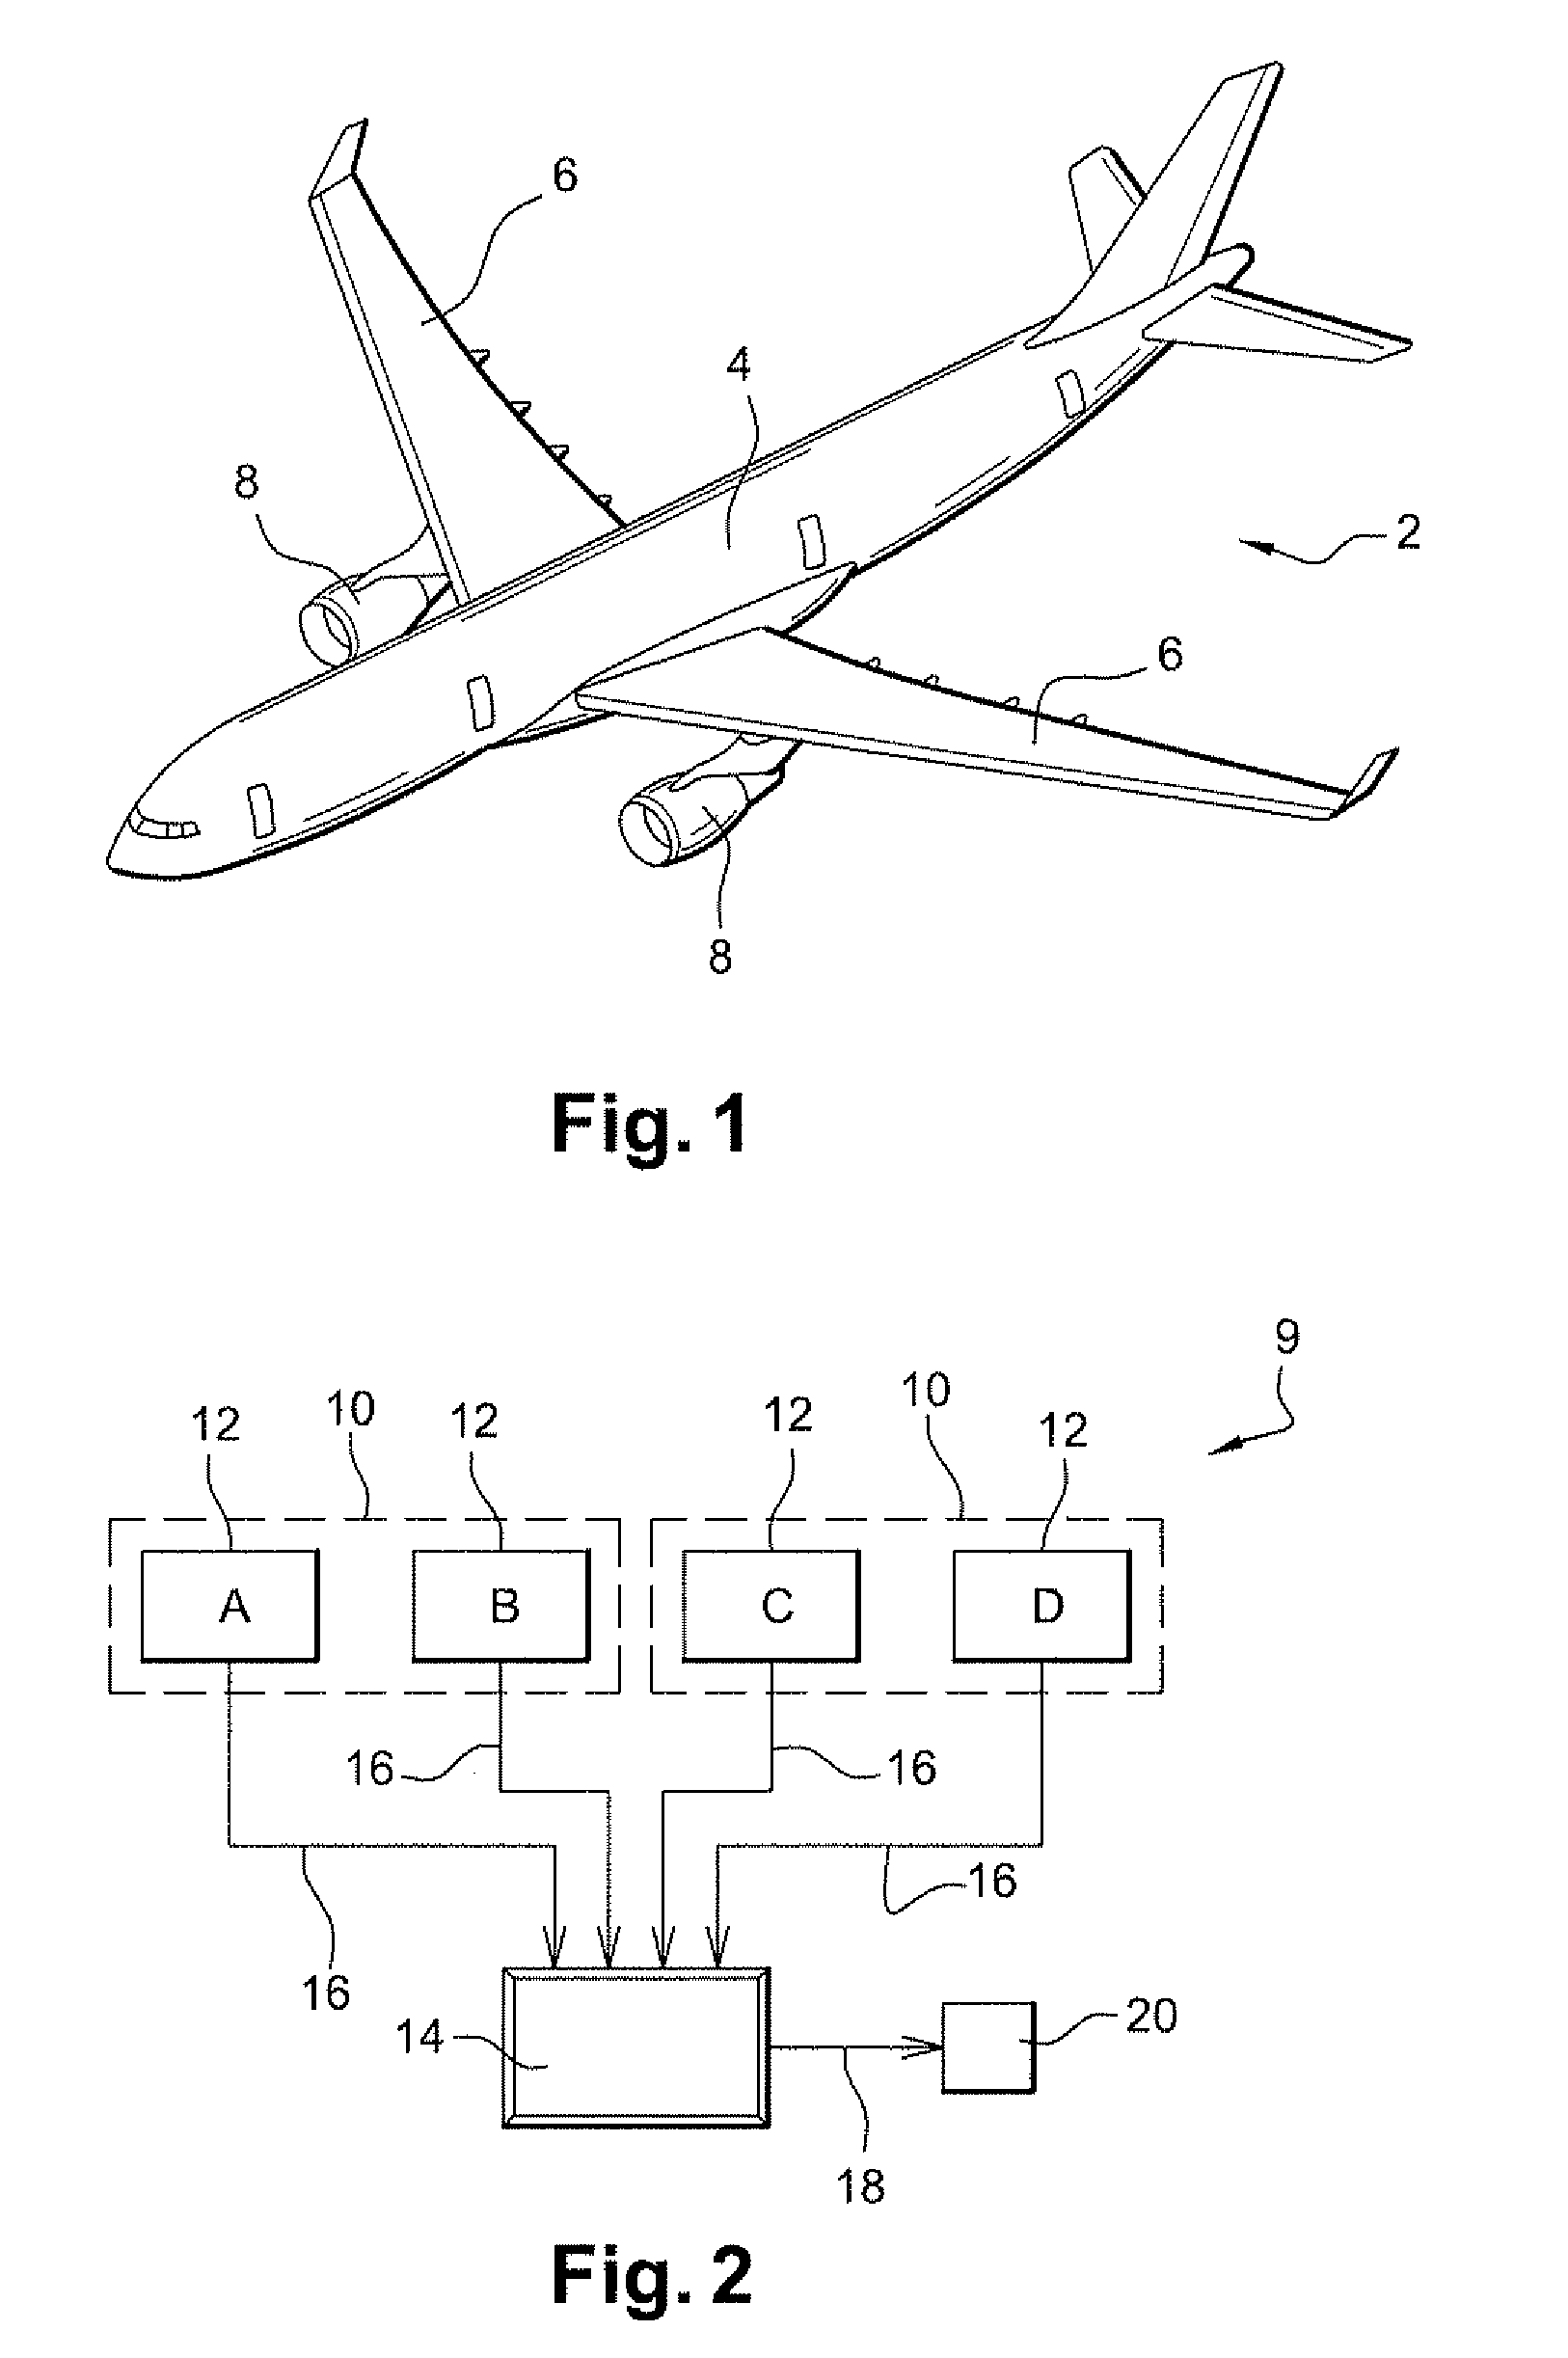 Method of controlling an aircraft, the method implementing a vote system